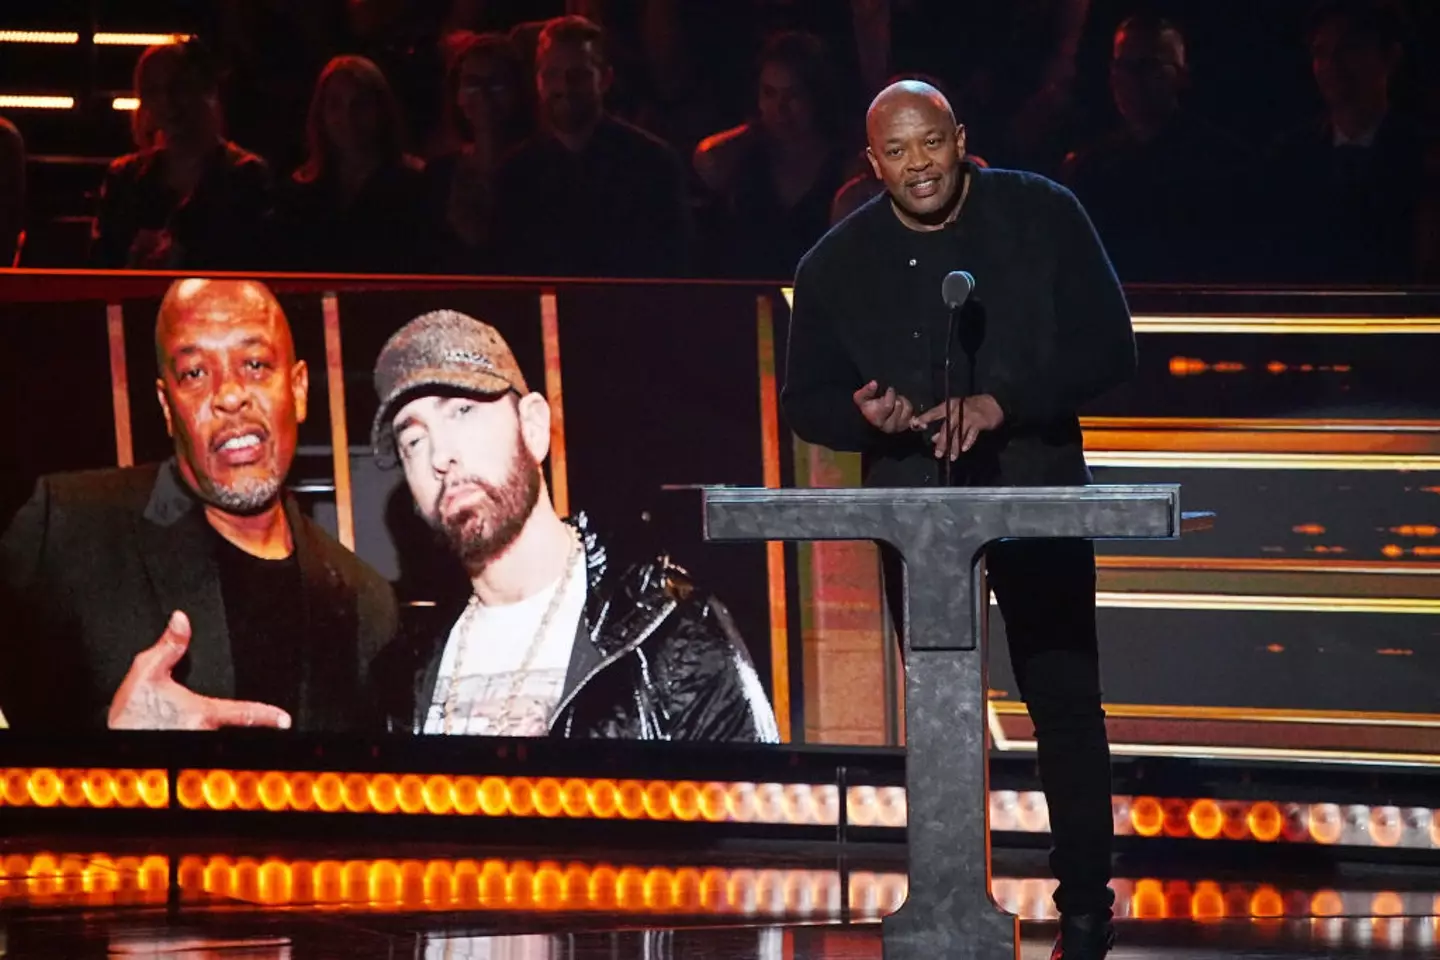 Dr Dre proudly inducted Eminem into the Rock & Roll Hall of Fame in 2022, 24 years after giving him his first deal.